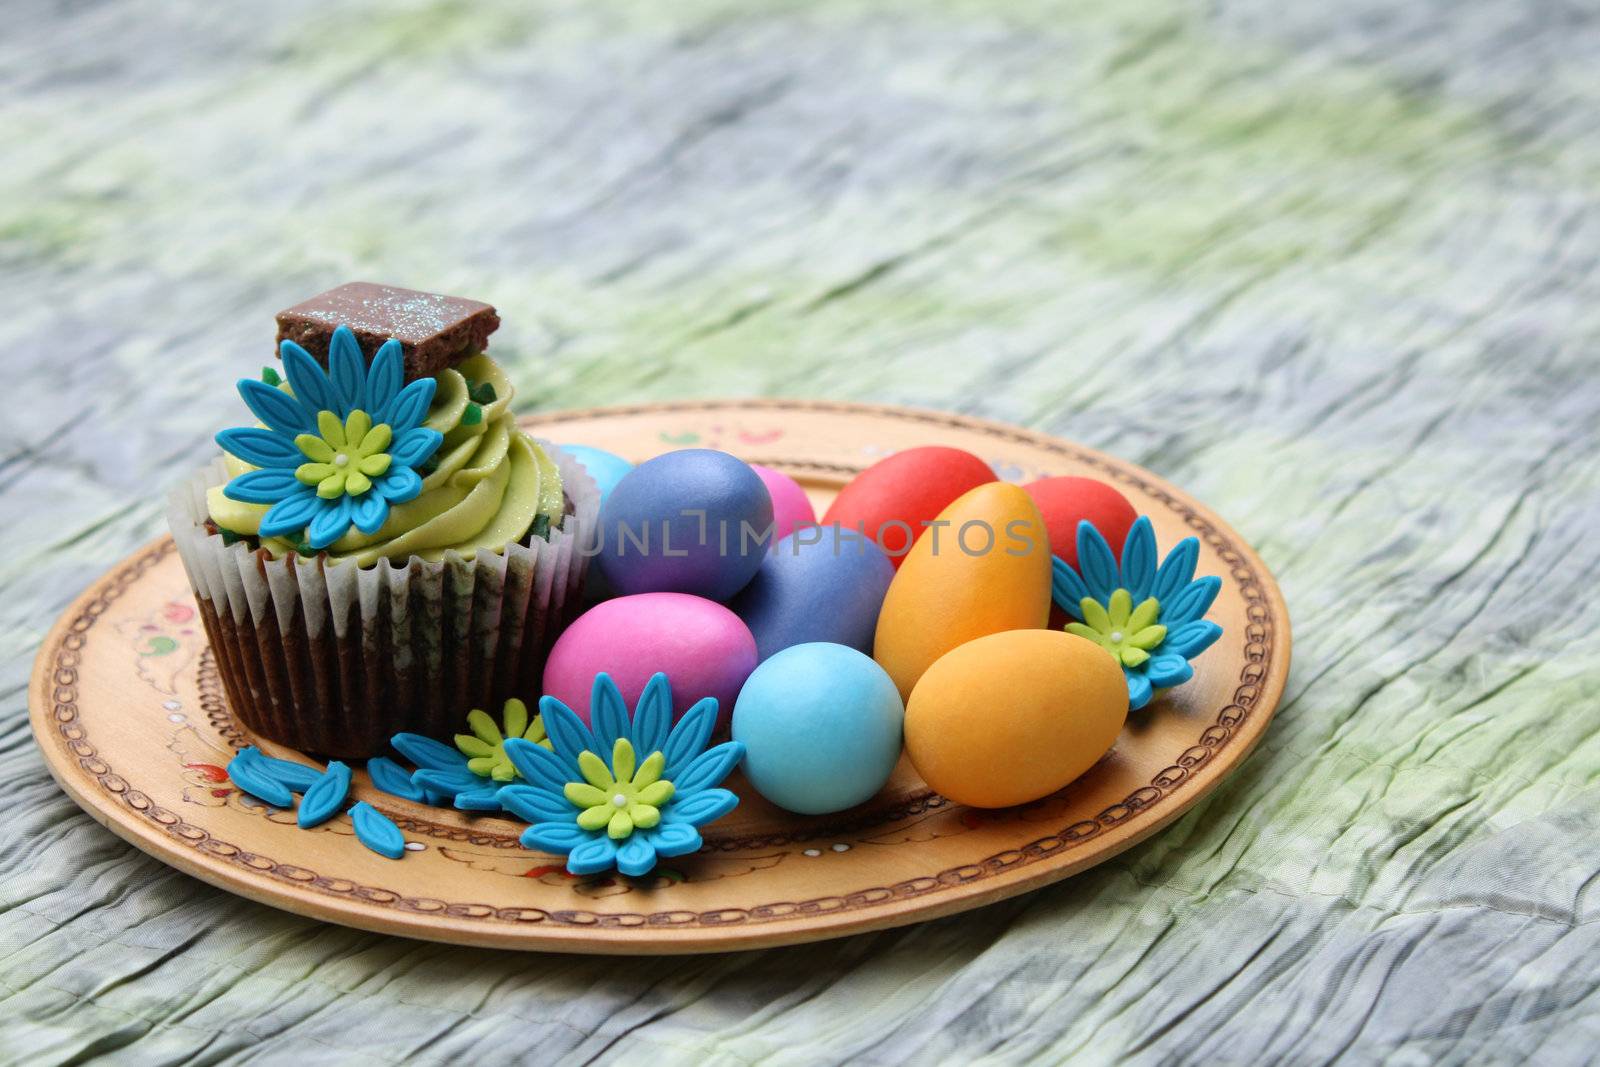 Chocolate cupcake with colorful easter eggs on an ornate plate